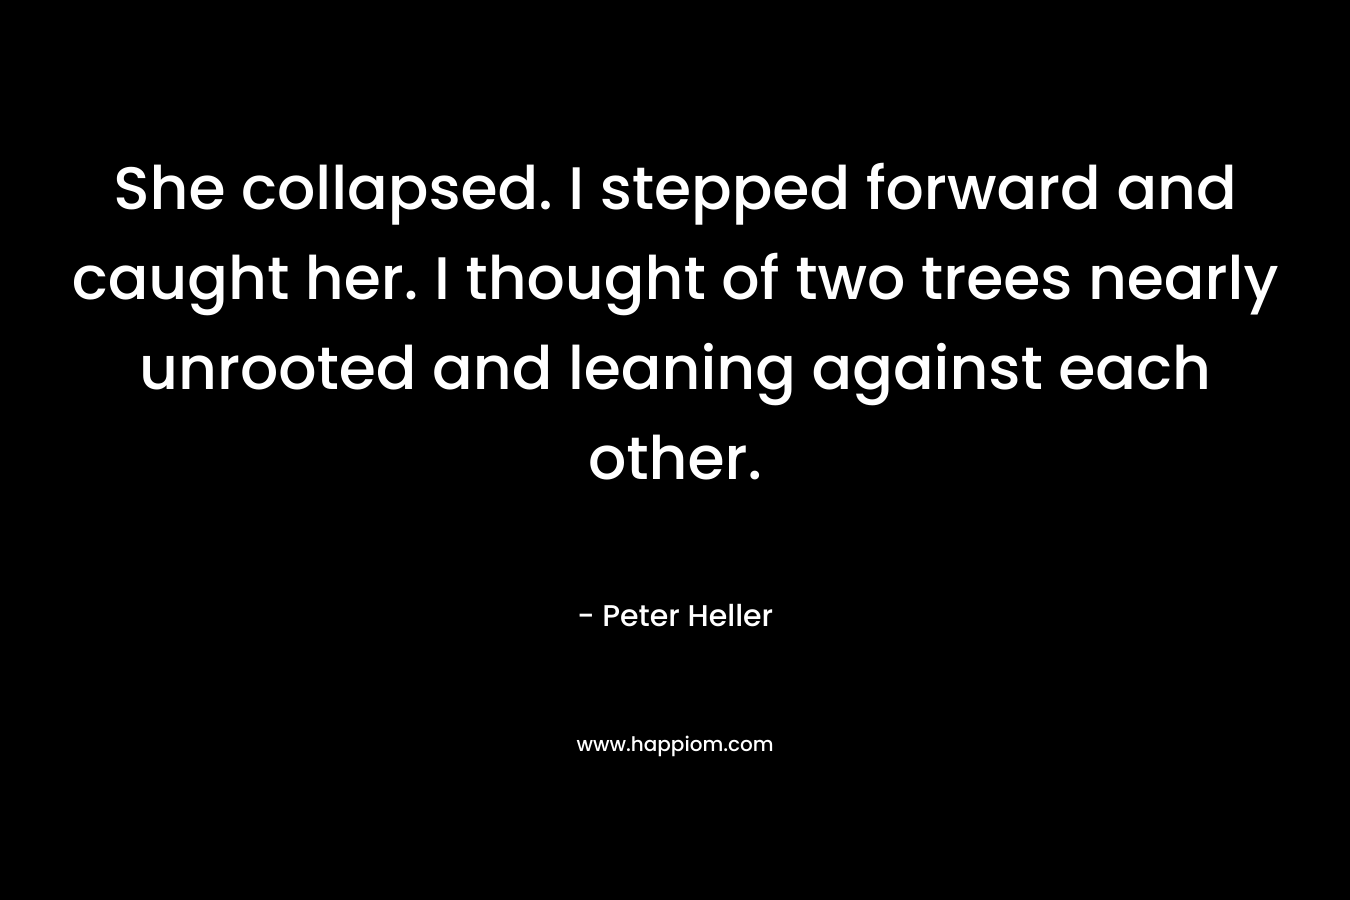 She collapsed. I stepped forward and caught her. I thought of two trees nearly unrooted and leaning against each other. – Peter Heller